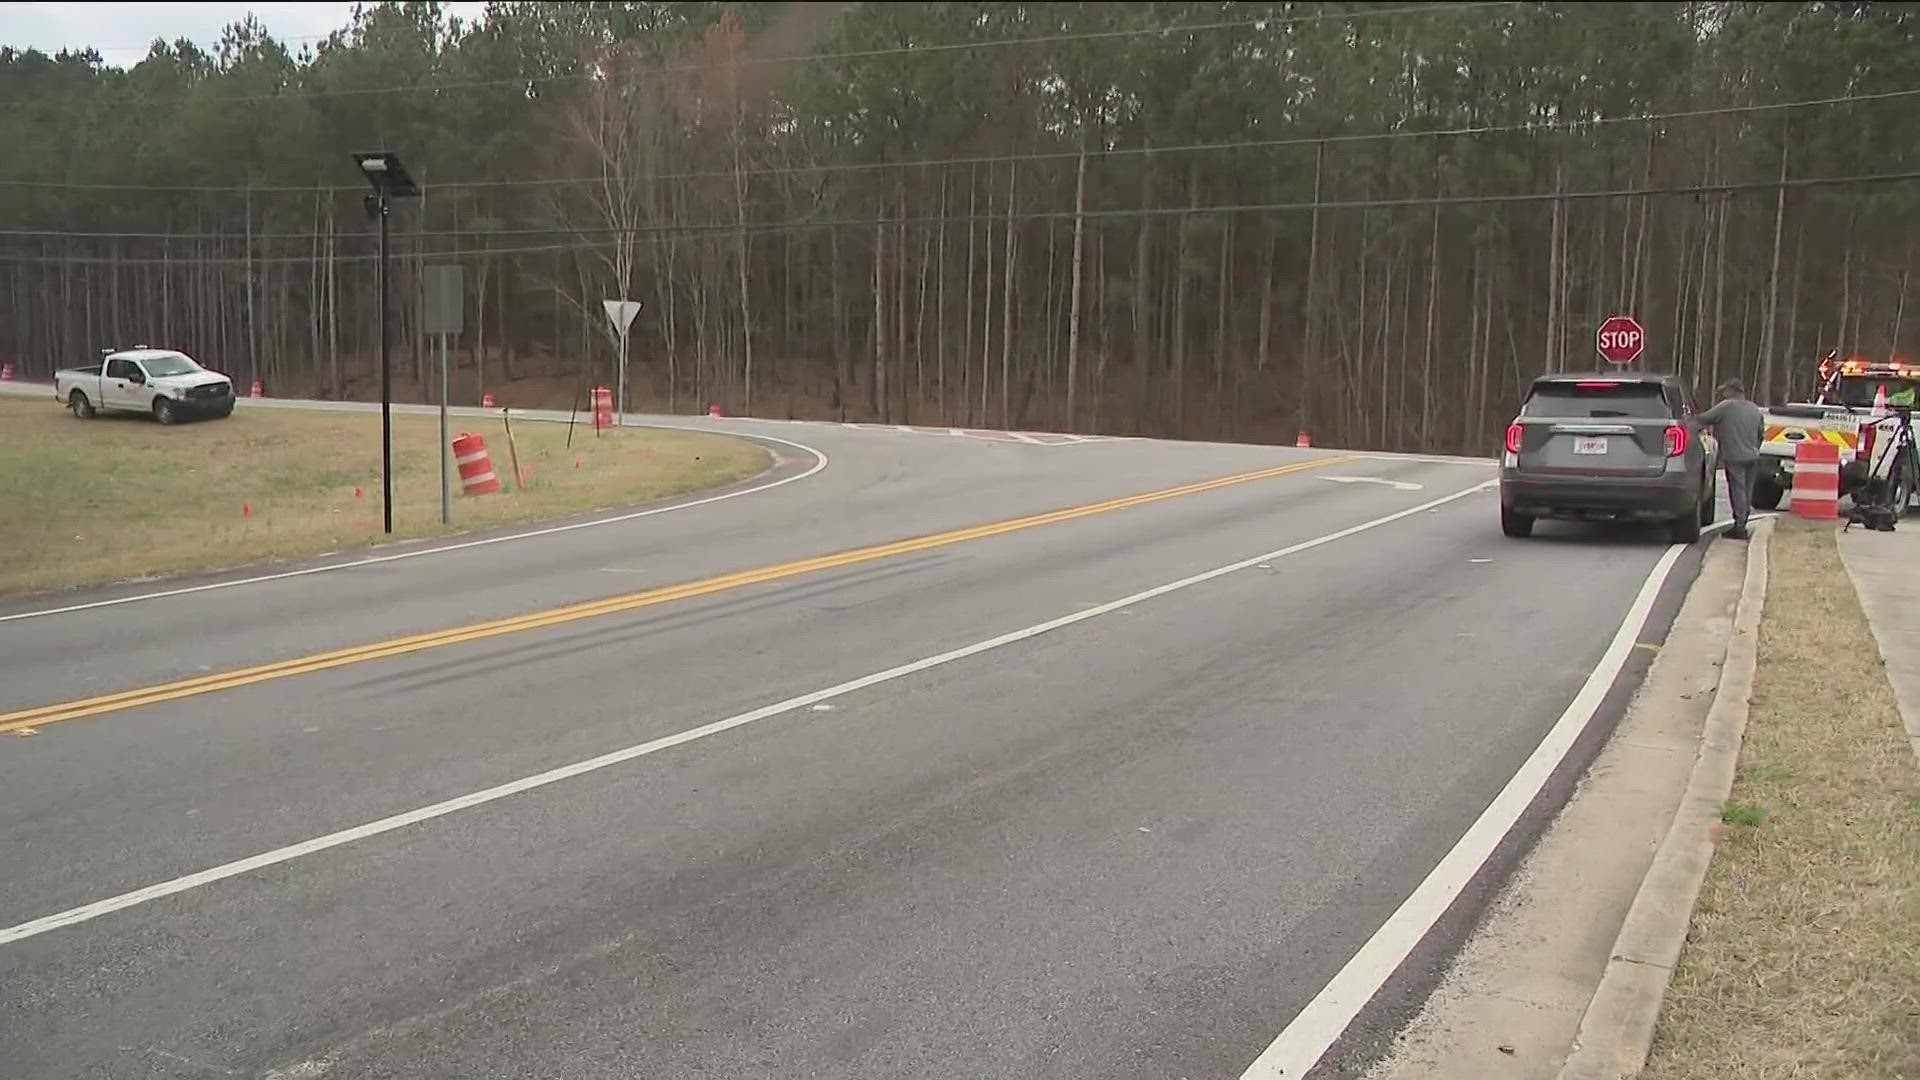 Police said at least five people have died at the intersection on Hwy 138 and Jonesboro Road over the last year.